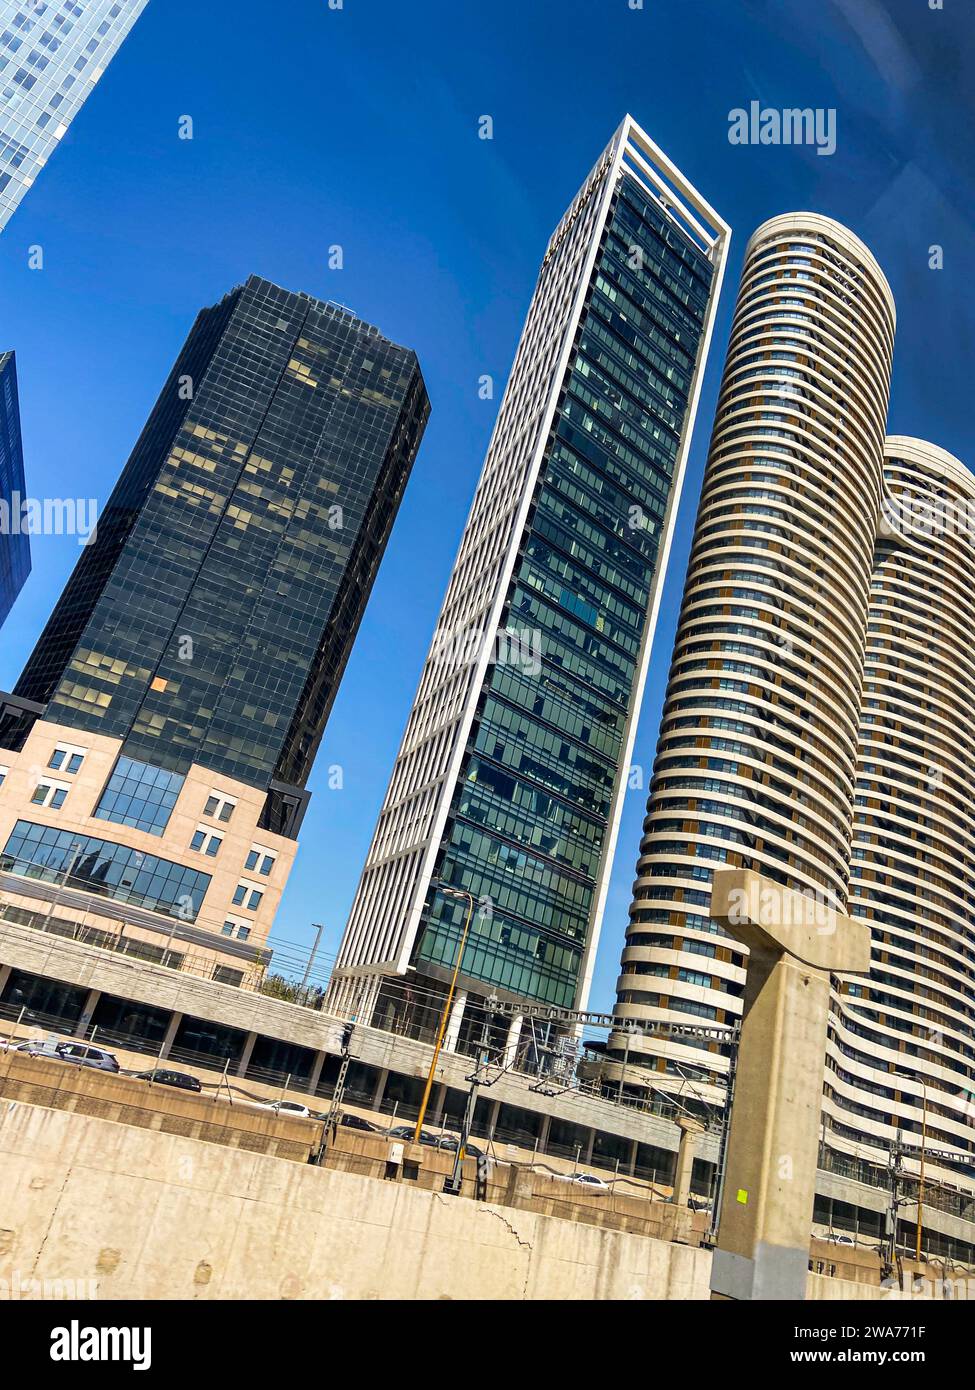 tall buildings in a city Stock Photo